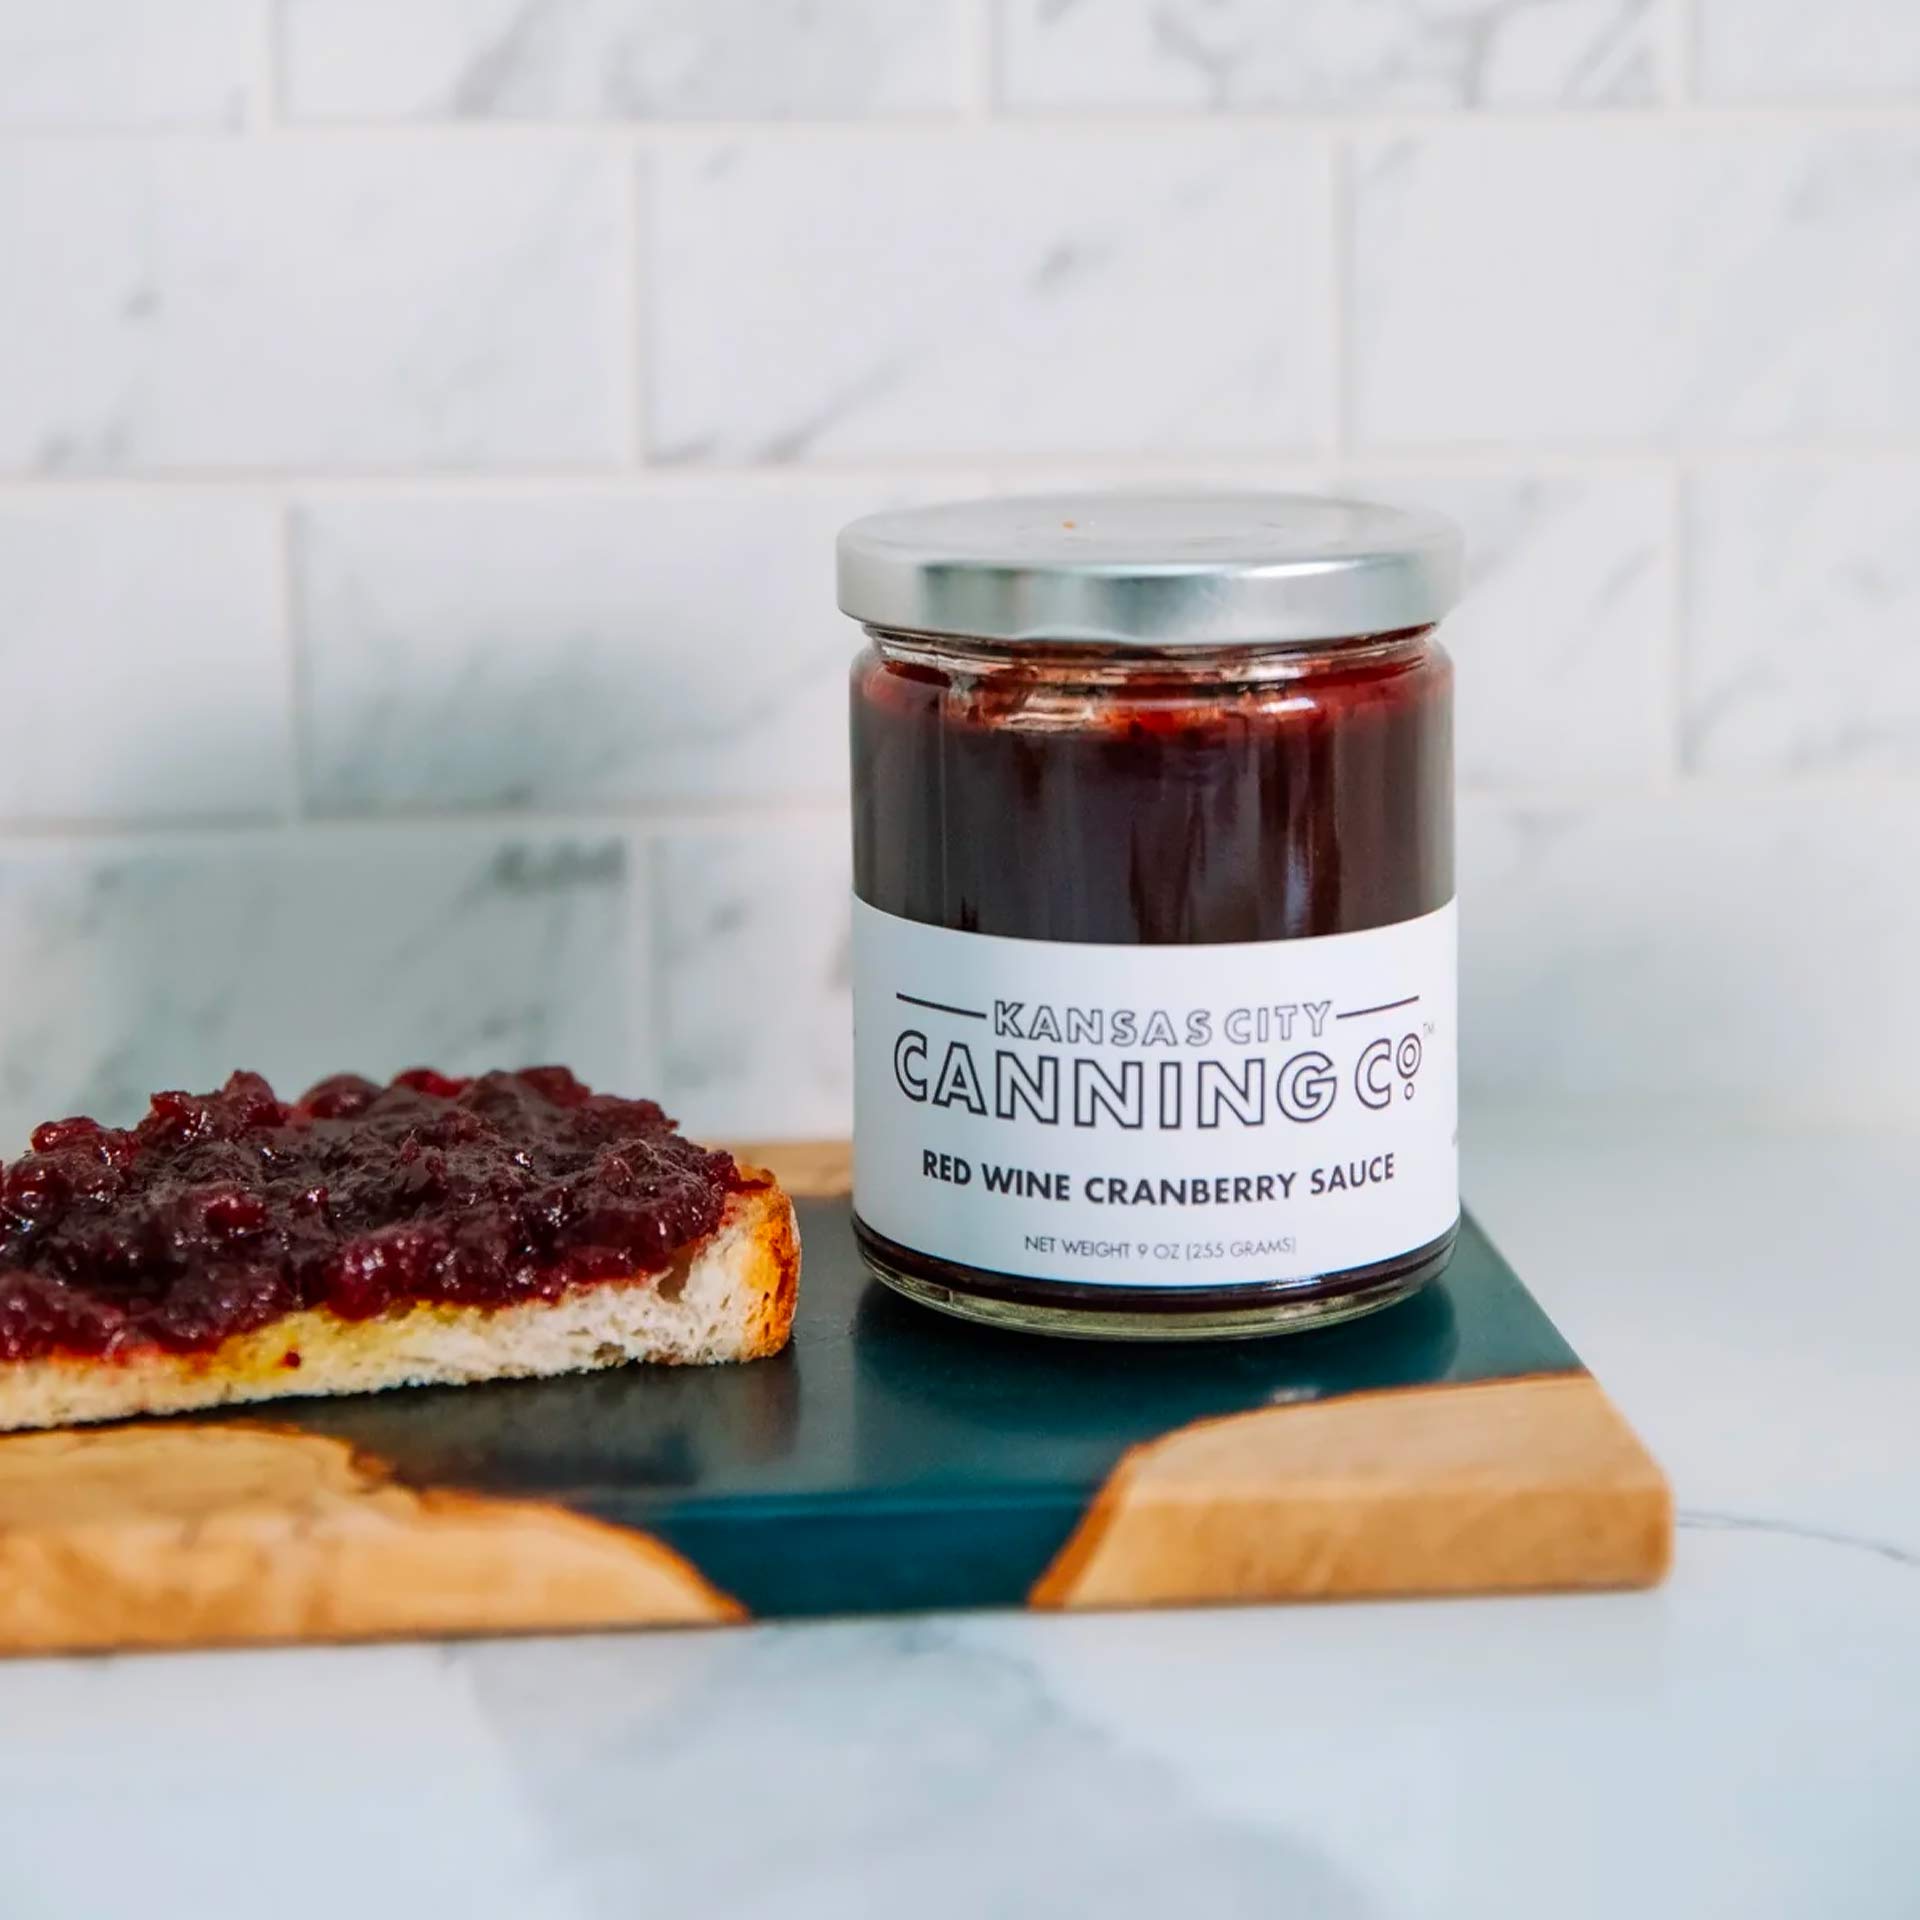 Kansas City Canning Co Red Wine Cranberry Sauce 12043298